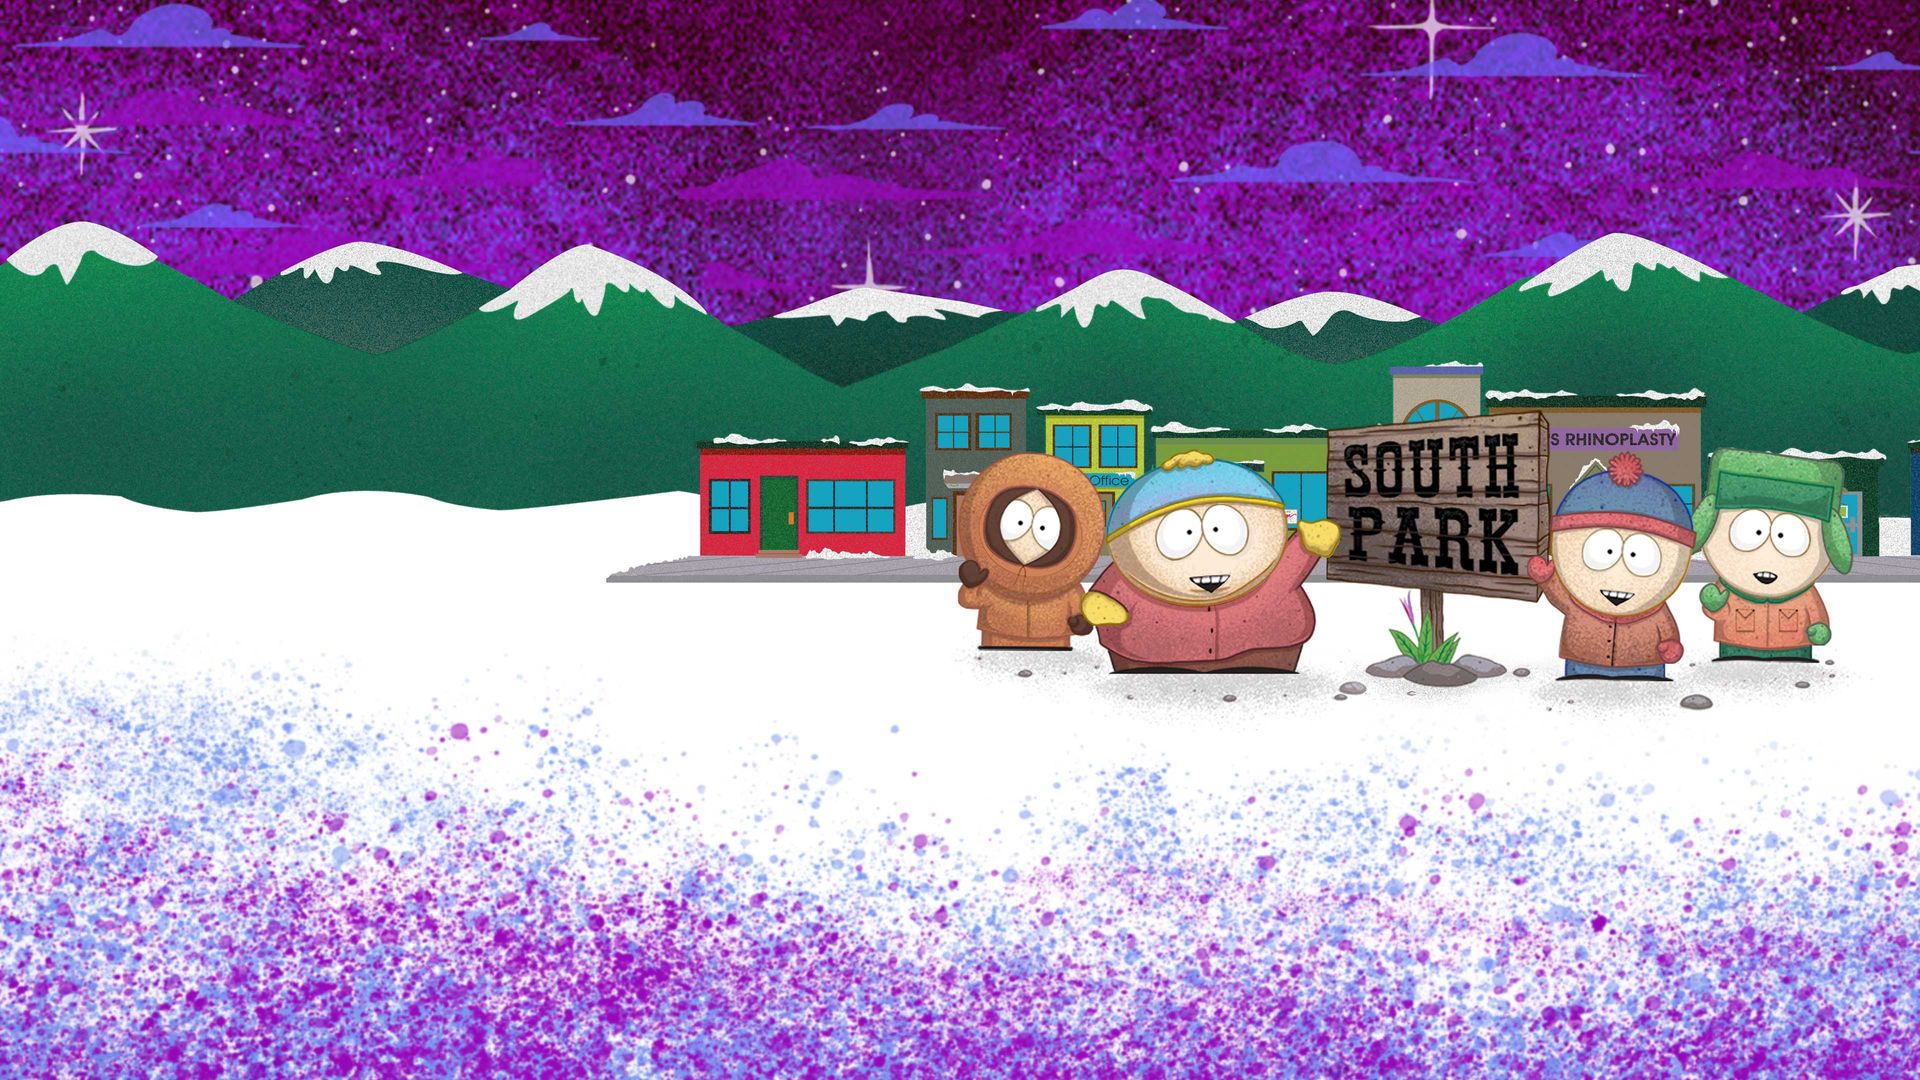 South Park: The 25th Anniversary Concert background